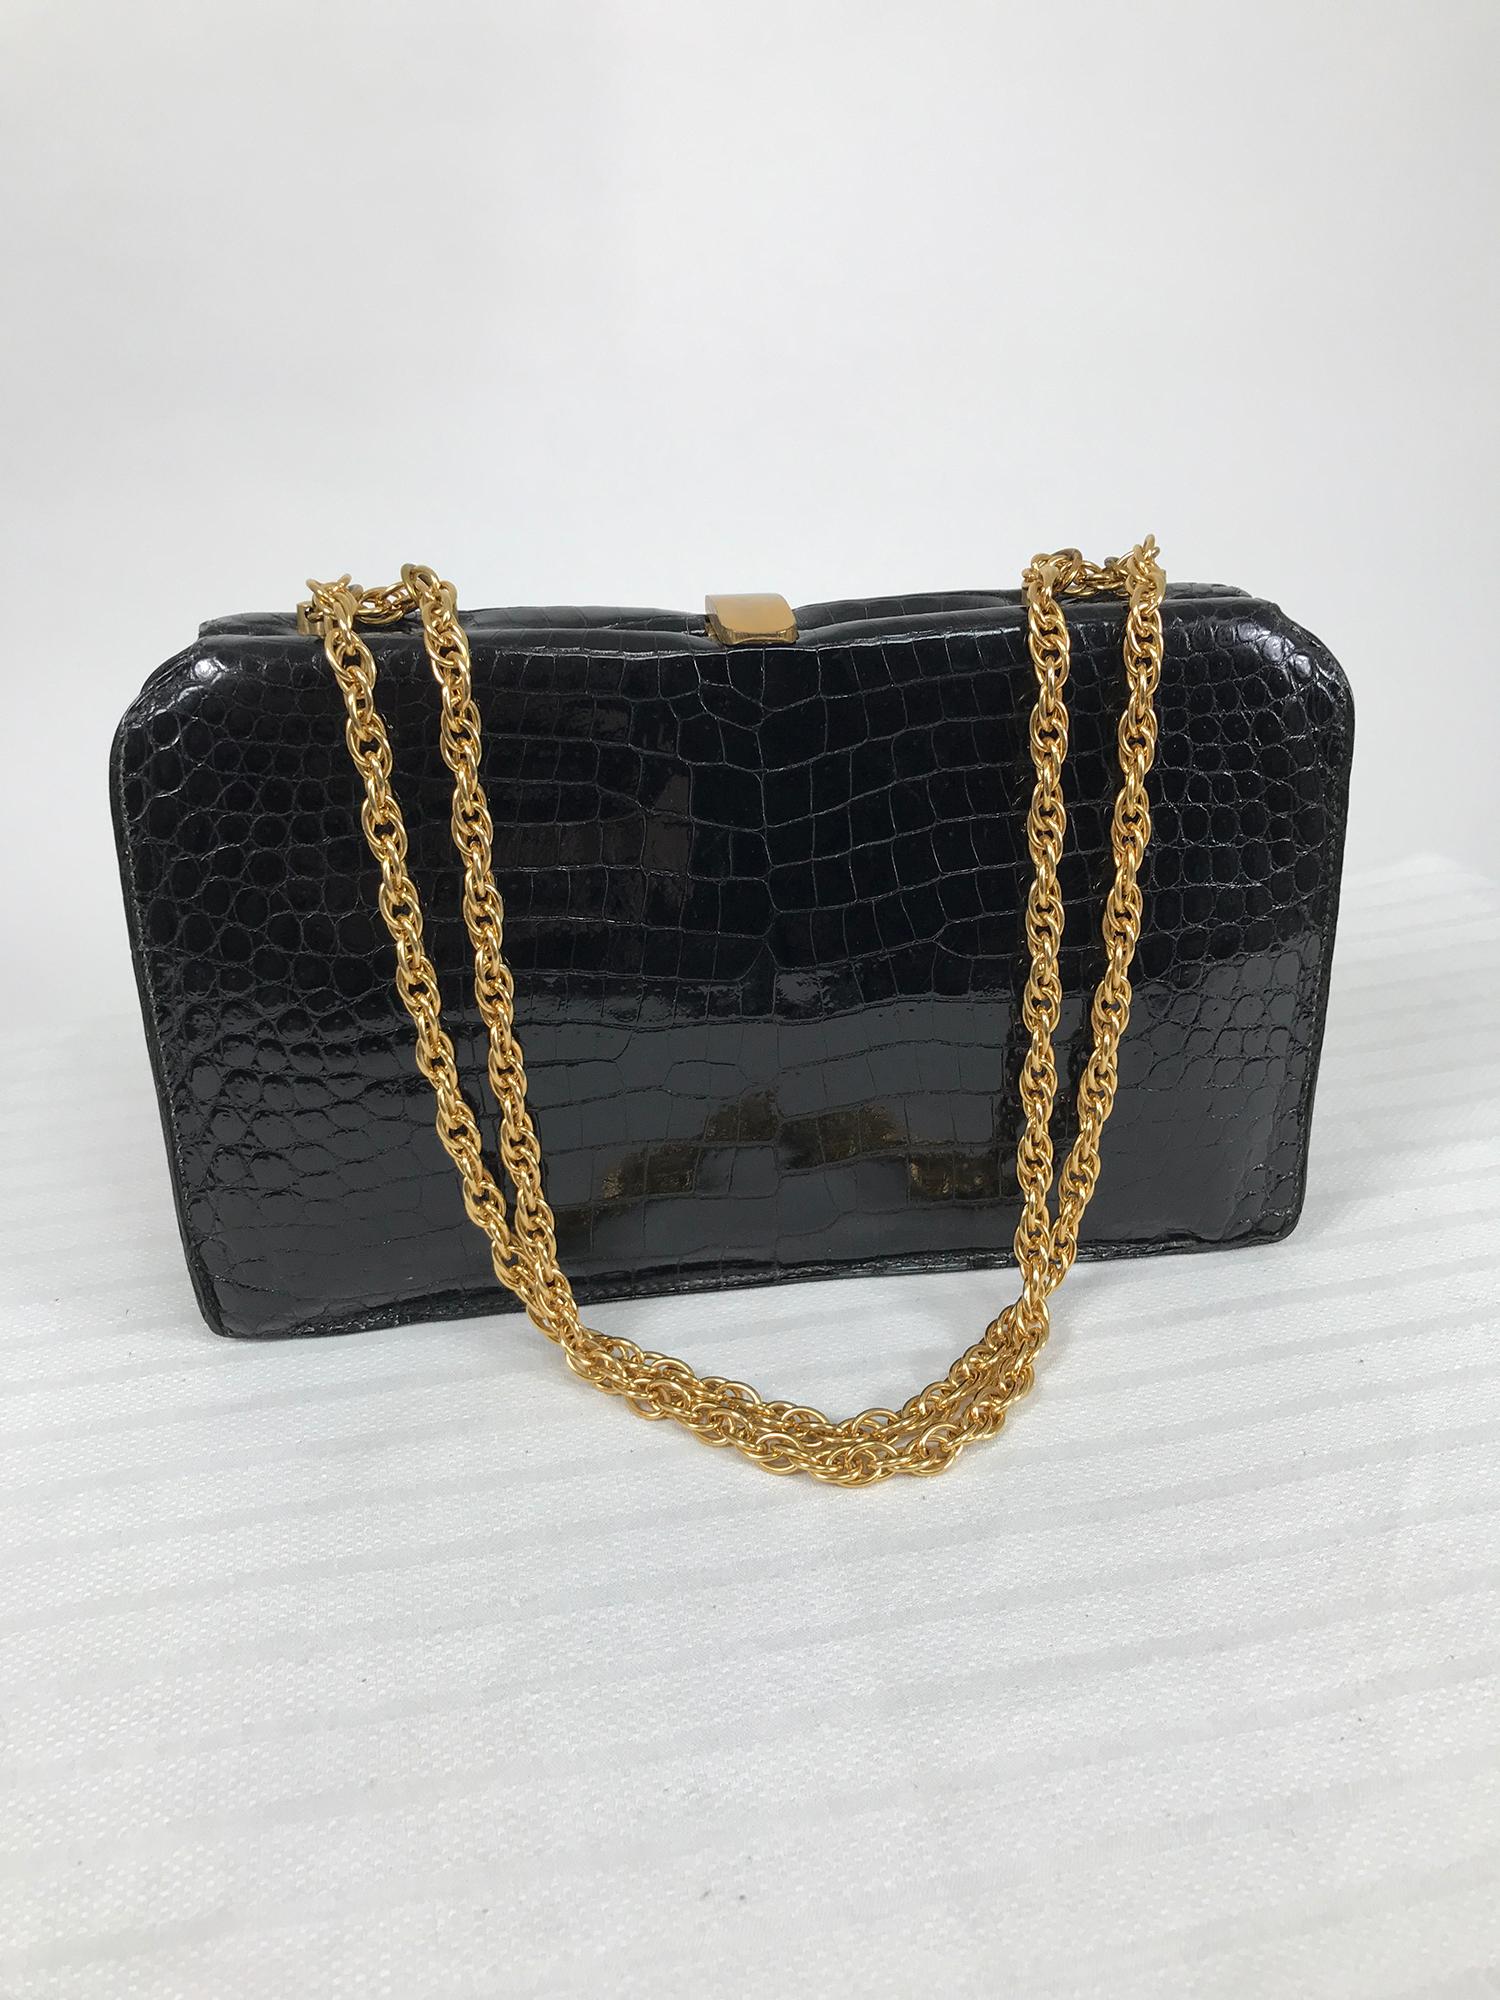 Schitz, Paris rare black crocodile frame handbag with gold hardware from 1953. Schitz was a leather goods shop in Paris retailing luggage, handbags, small cases, umbrellas in exotic leathers.
This beautiful bag is in excellent condition. An interior